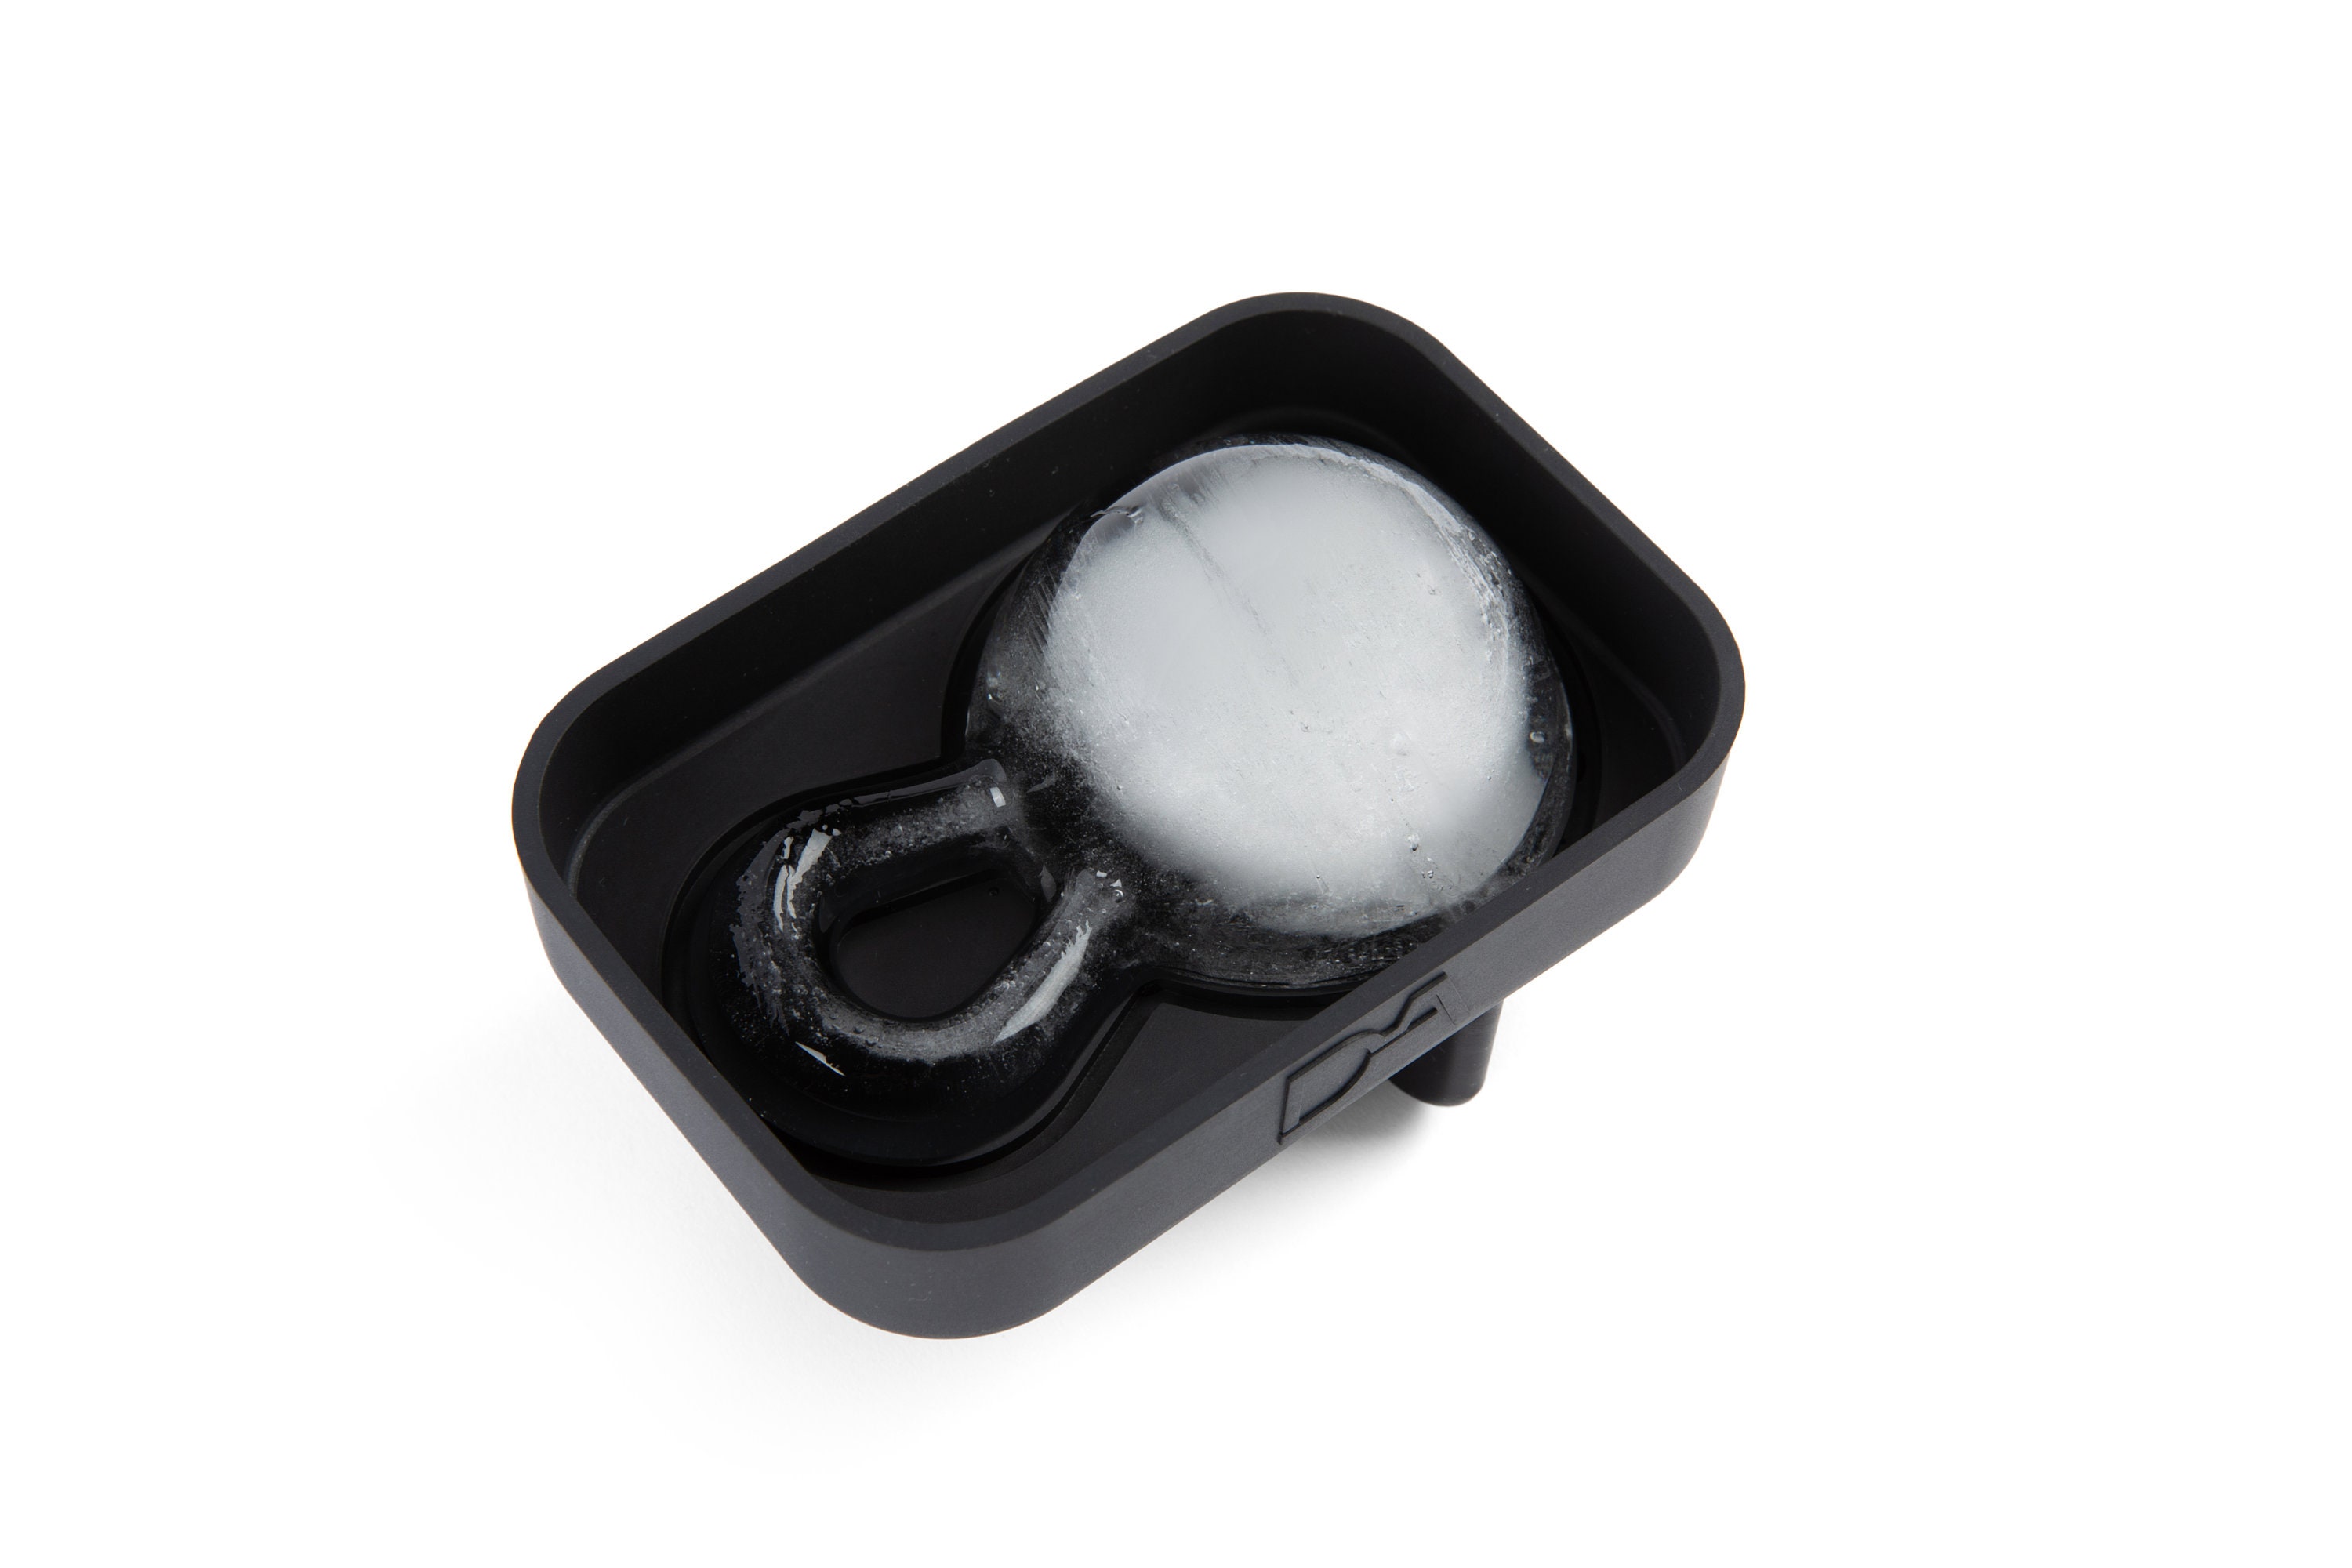 Kettlebell Whiskey Ice Cube - Makes Kettlebell shaped Ice Balls -- Fit –  Drink Armor